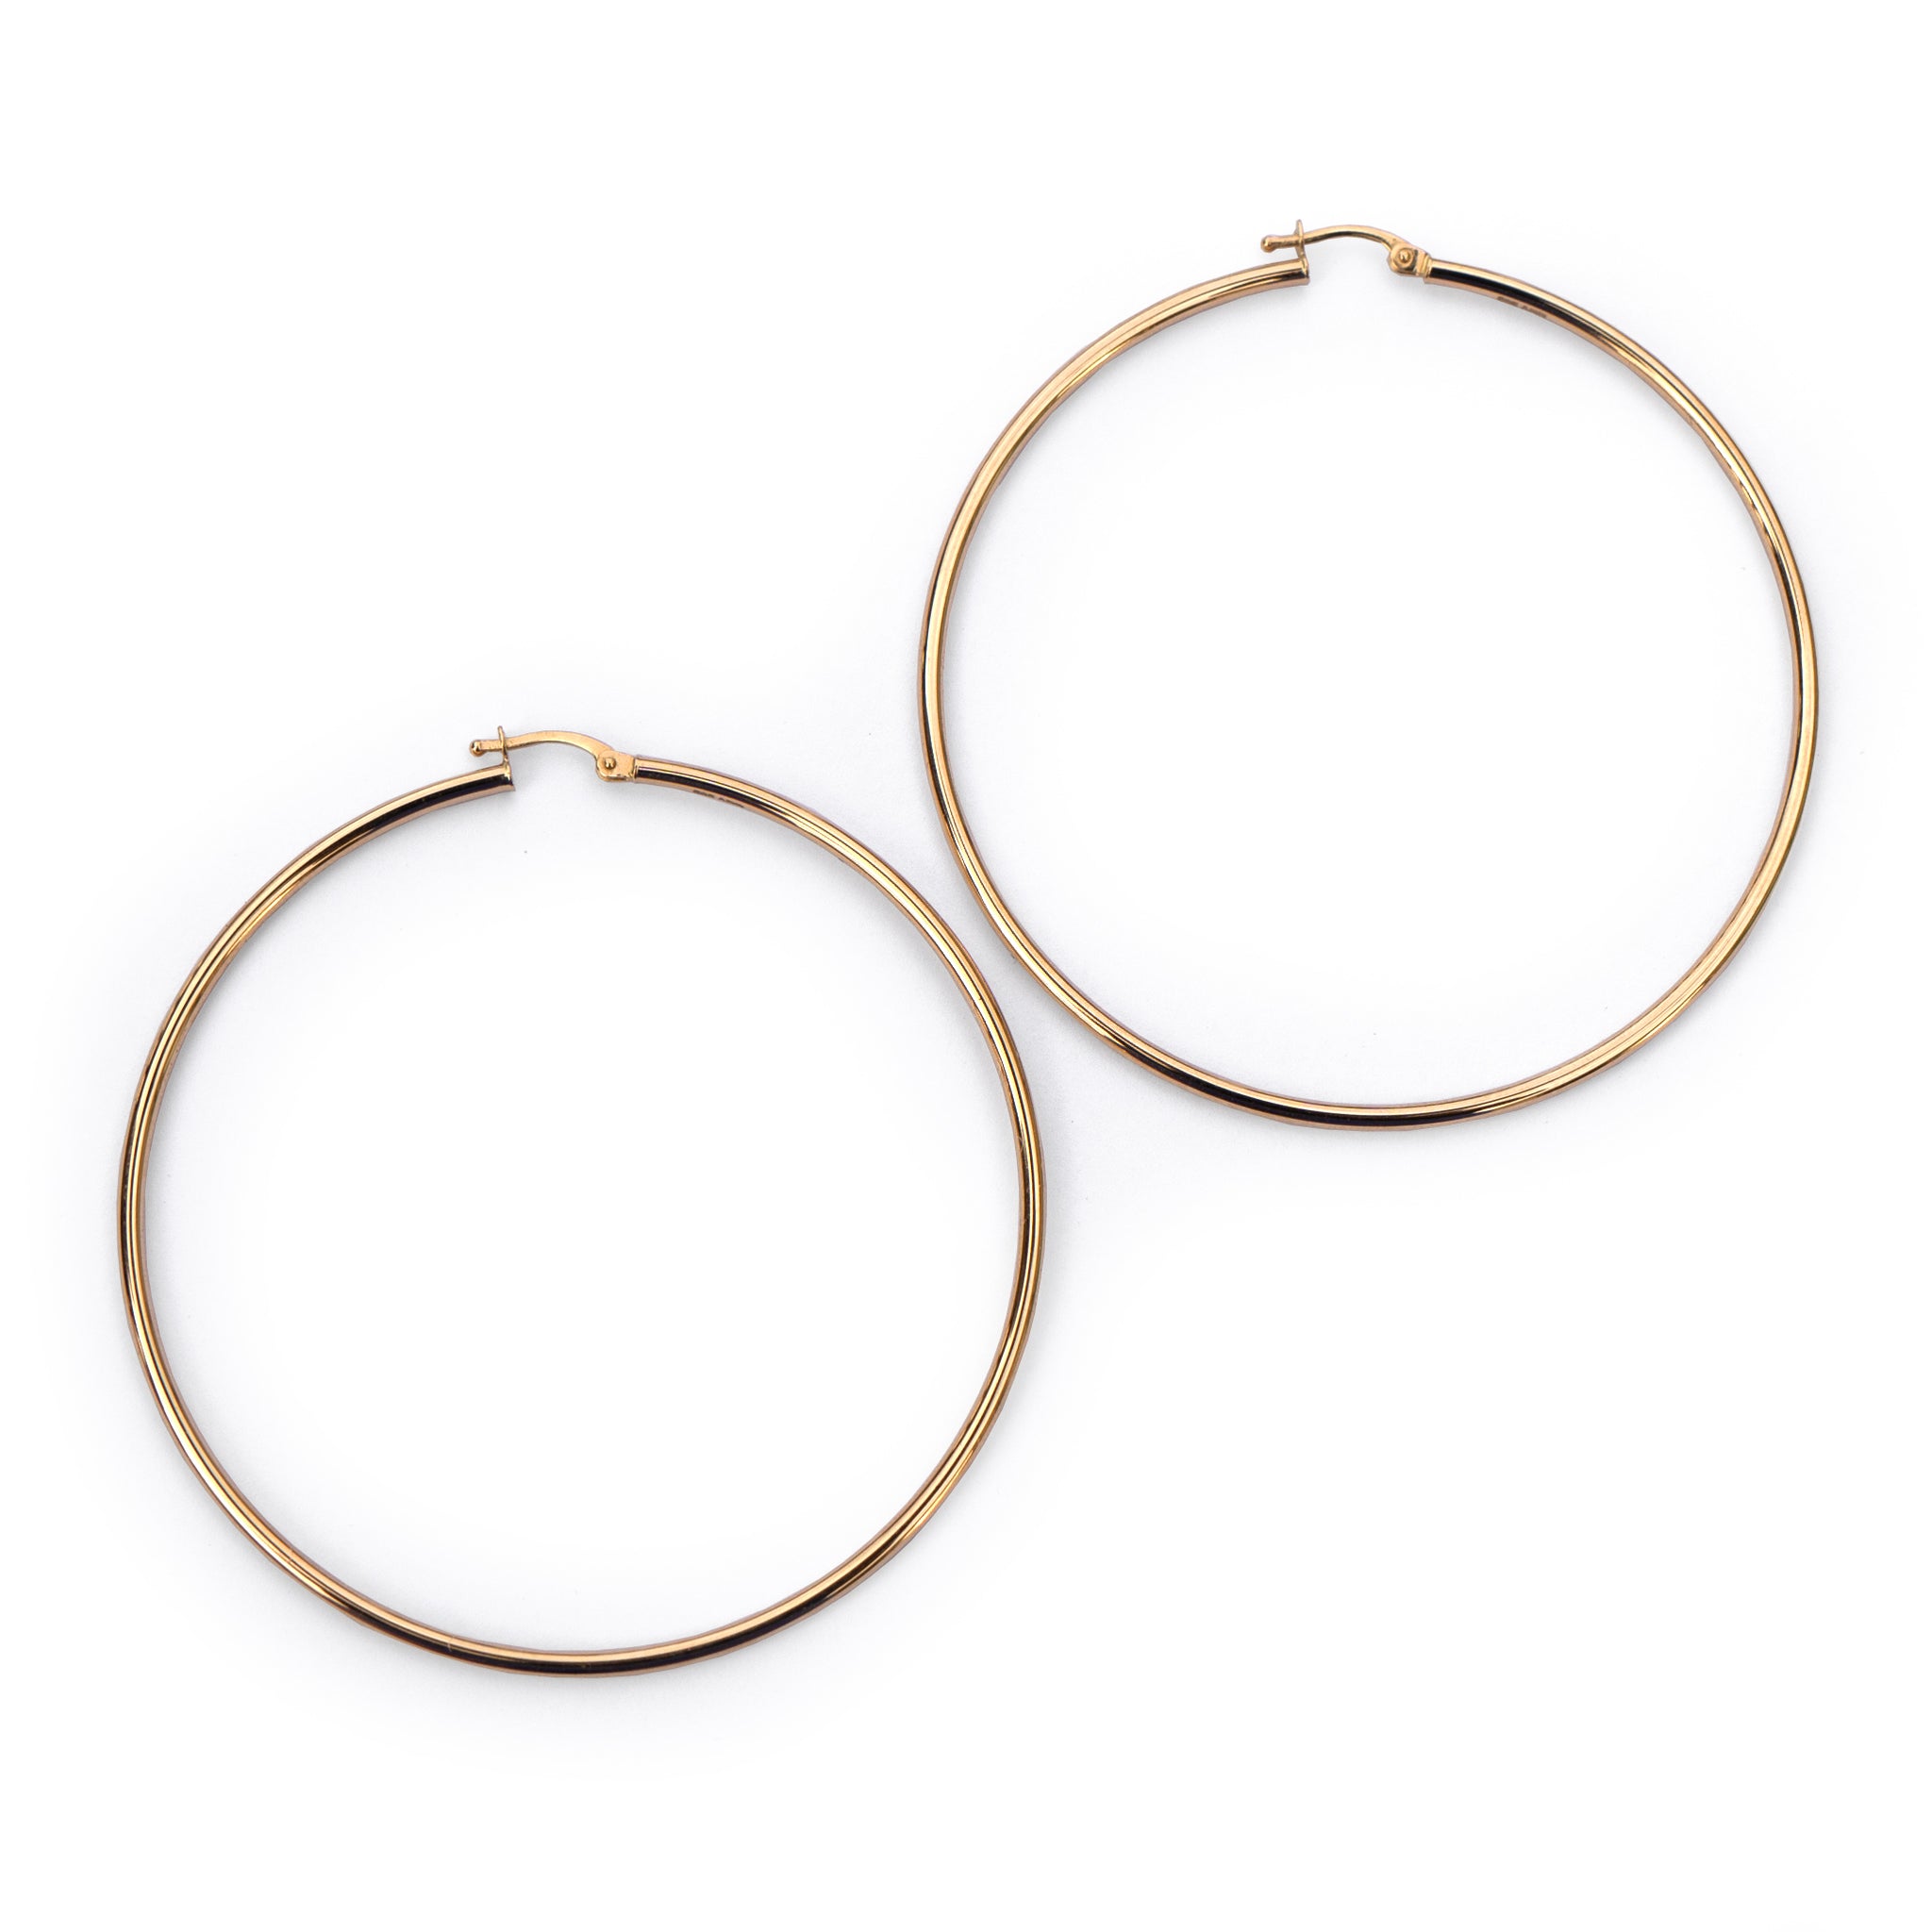 60 mm gold hoops